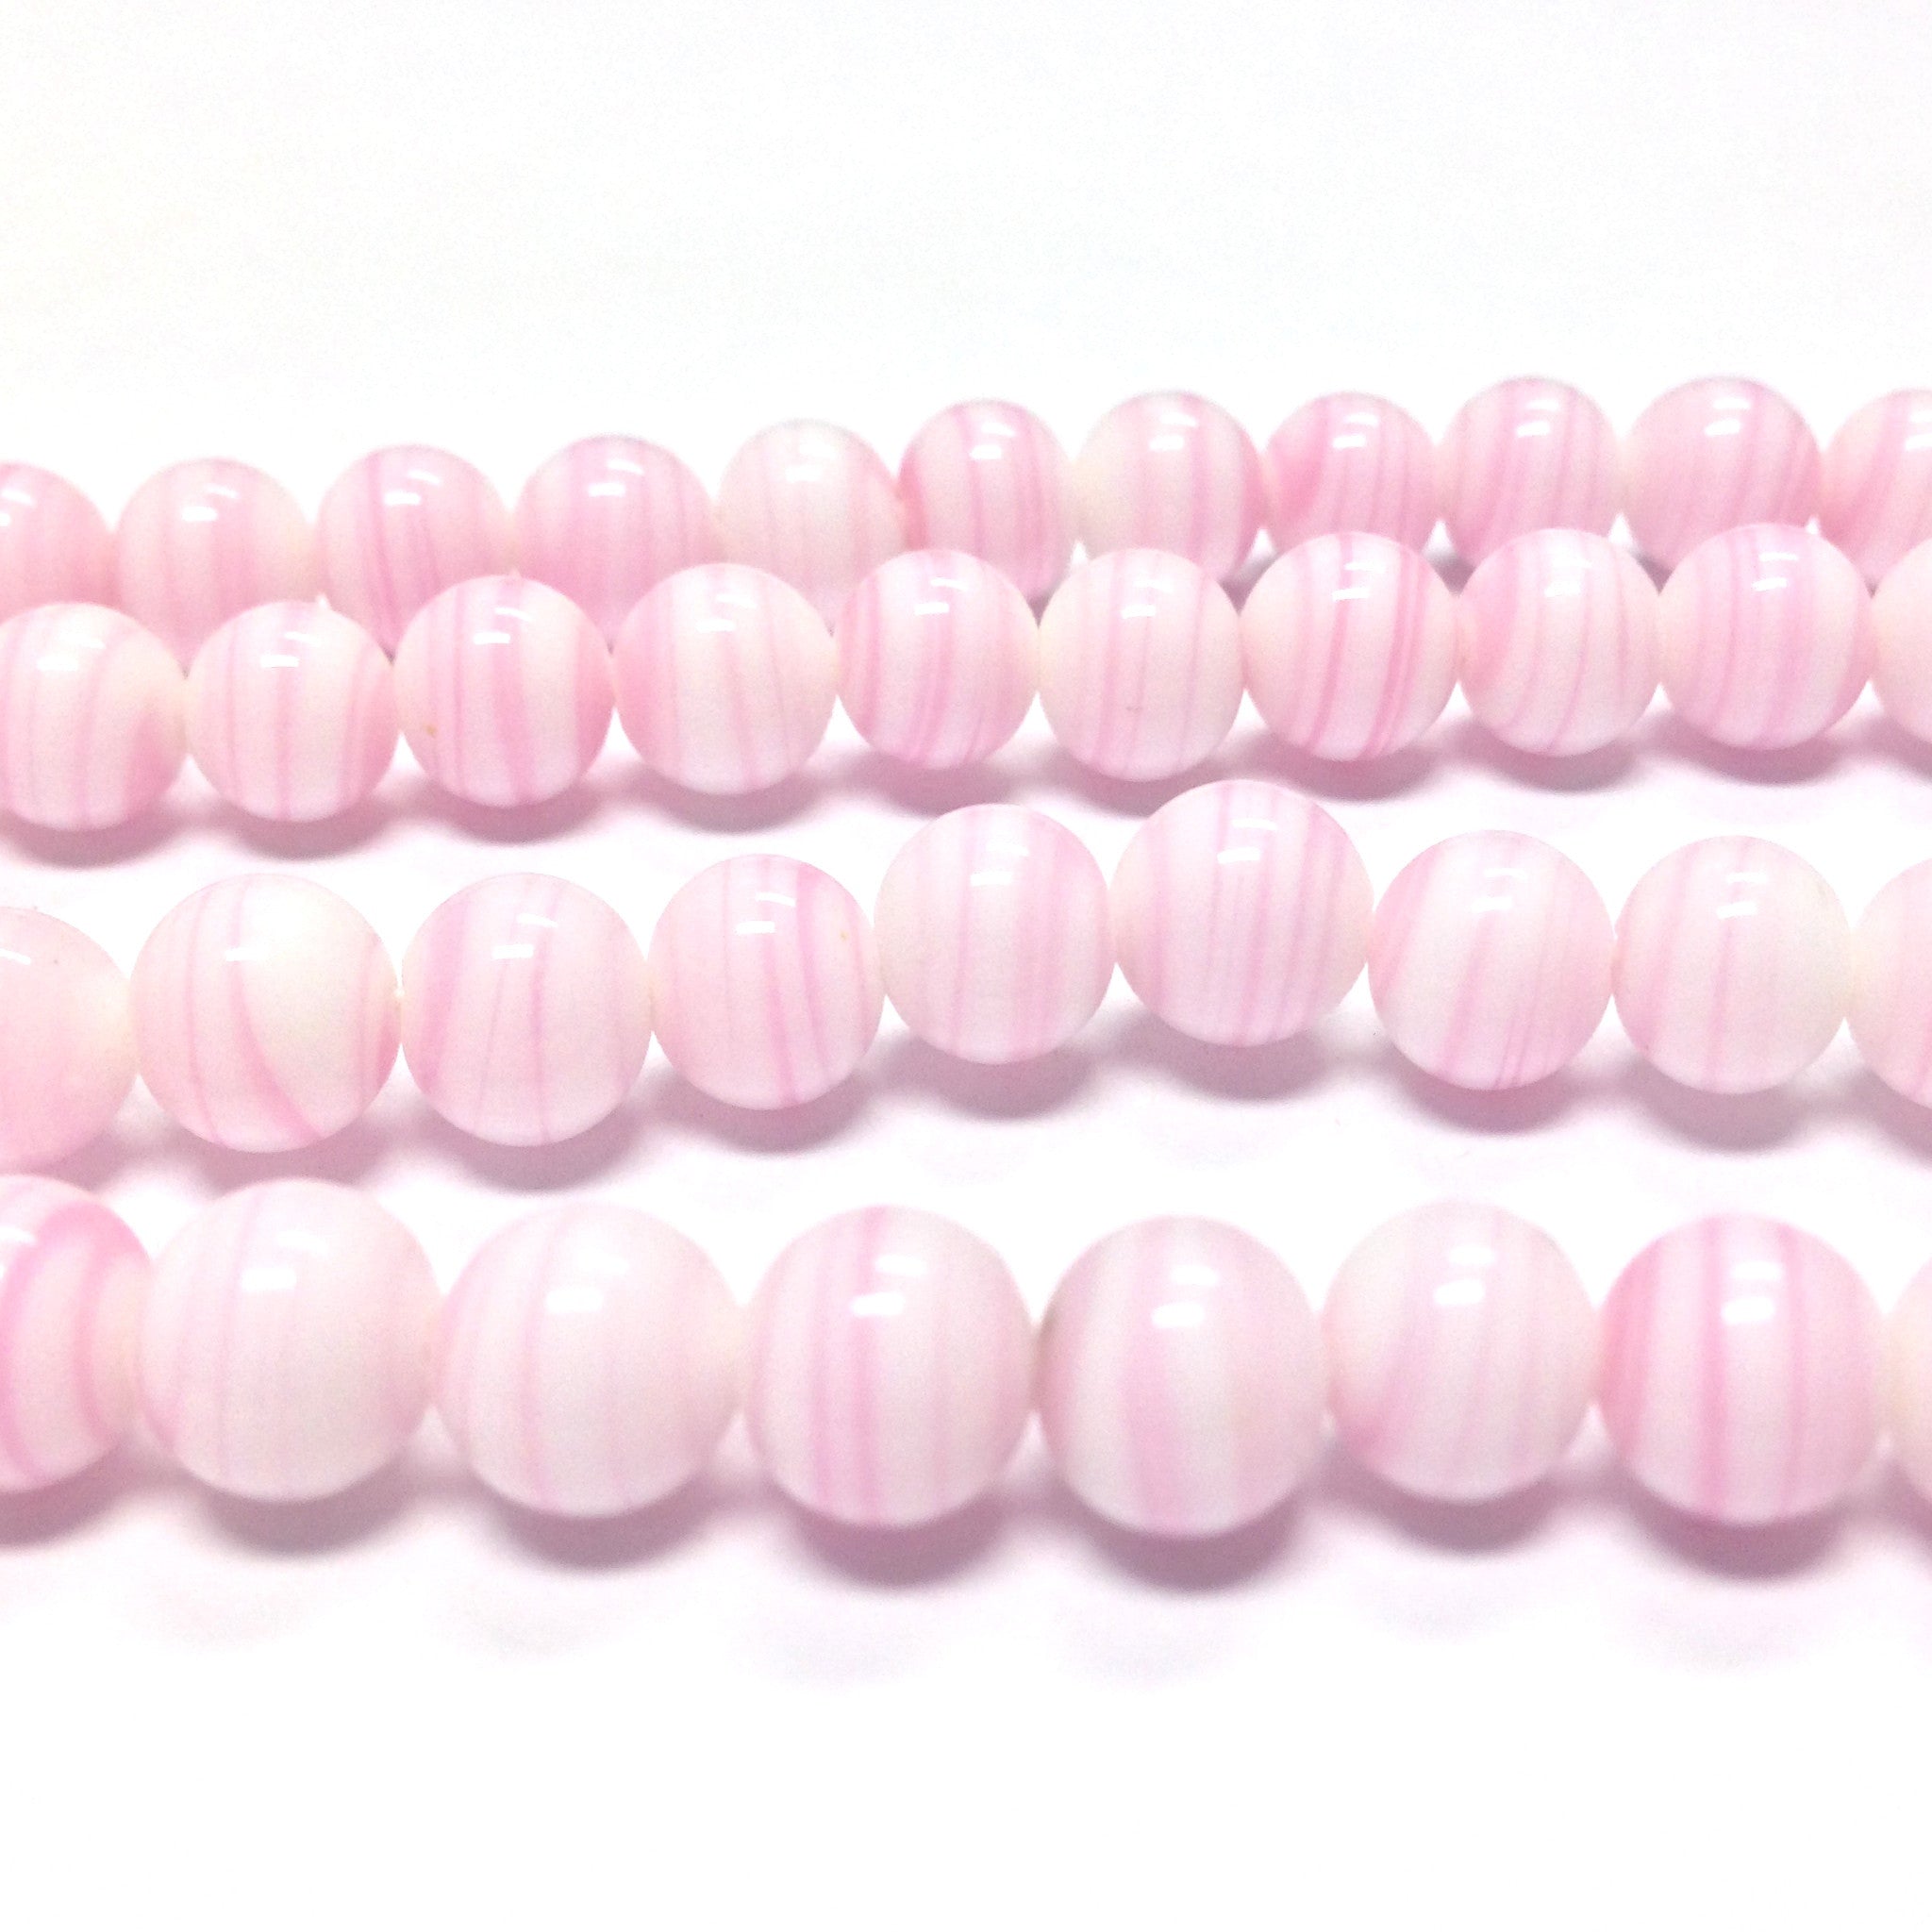 Pink Frosted 10mm Round Plastic Beads - White Swirls (150pcs)